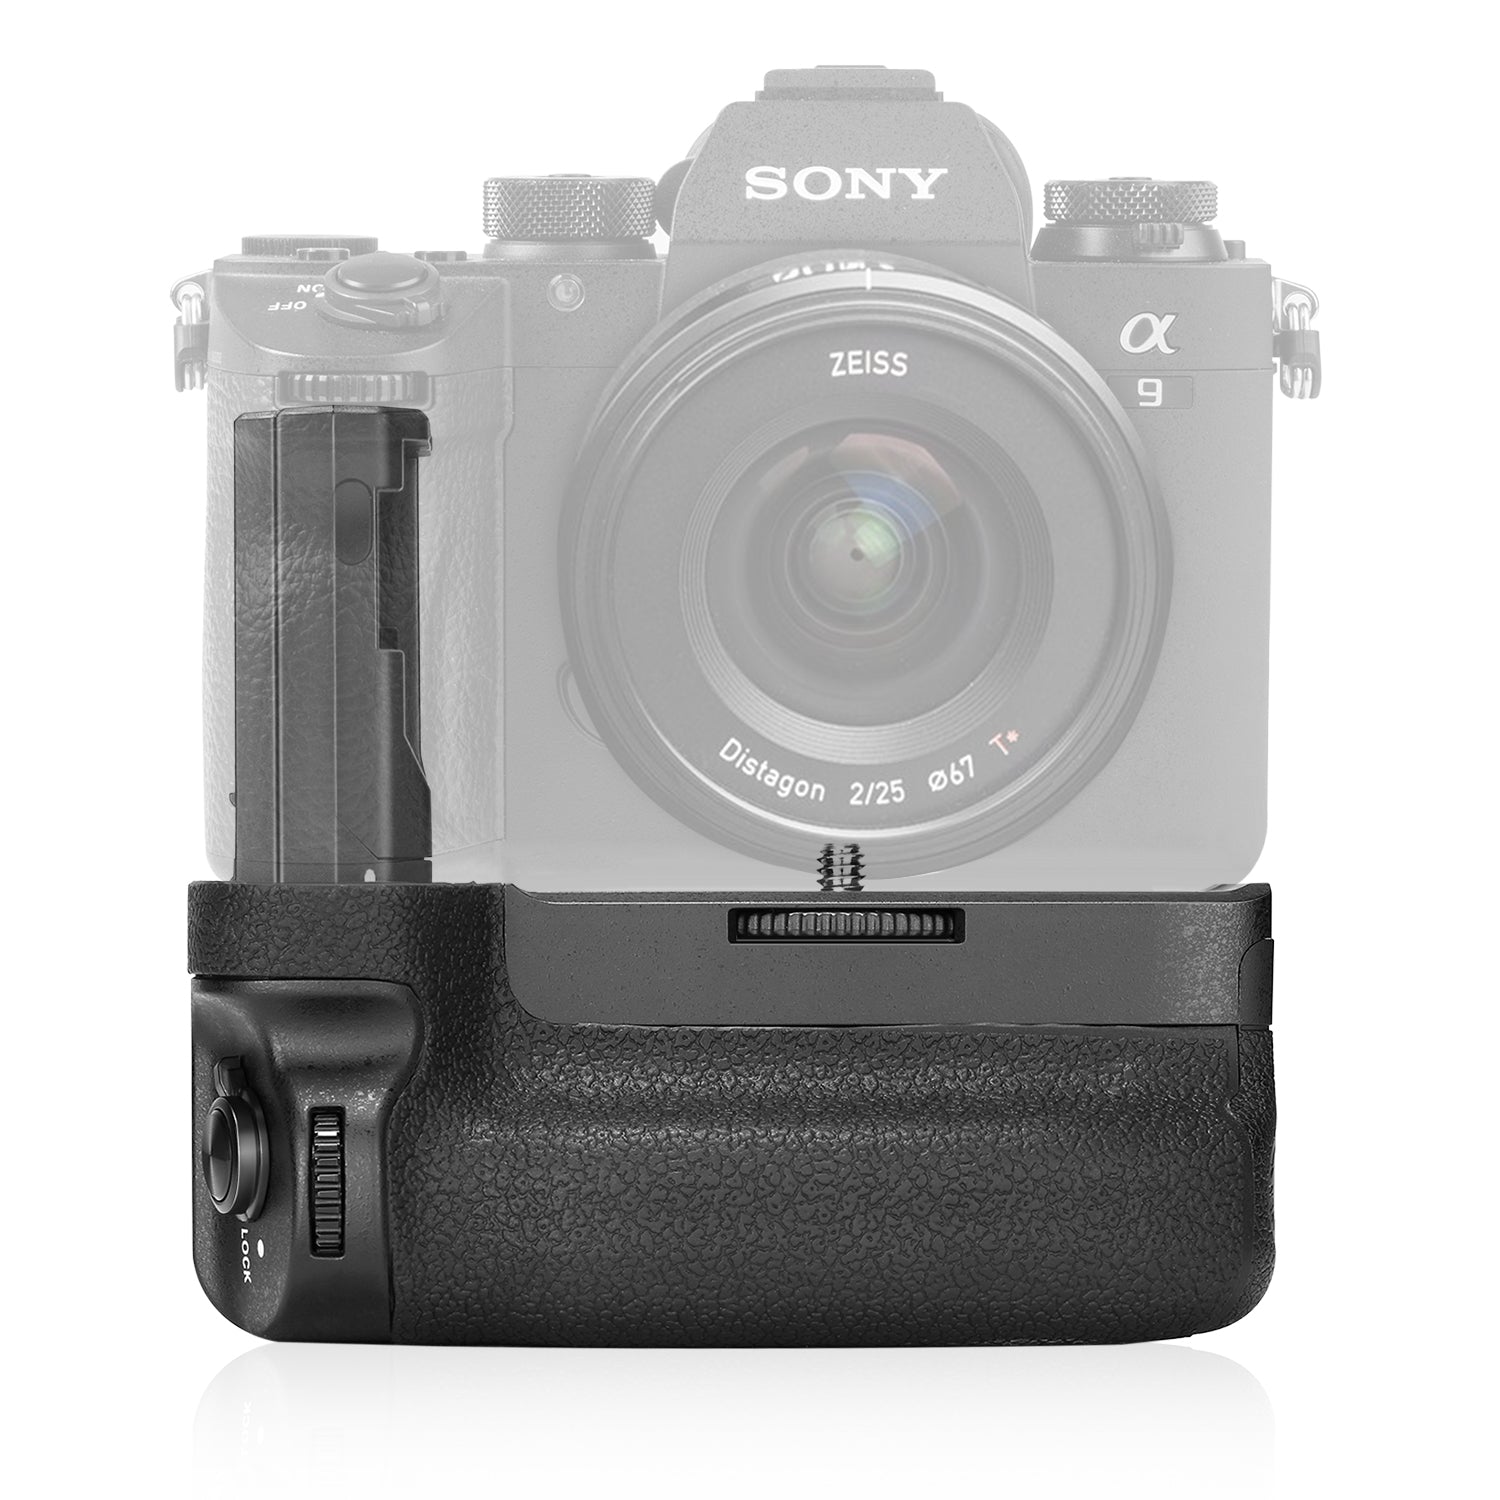 NEEWER Replacement Vertical Battery Grip of VG-C3EM for Sony A9/A7RIII